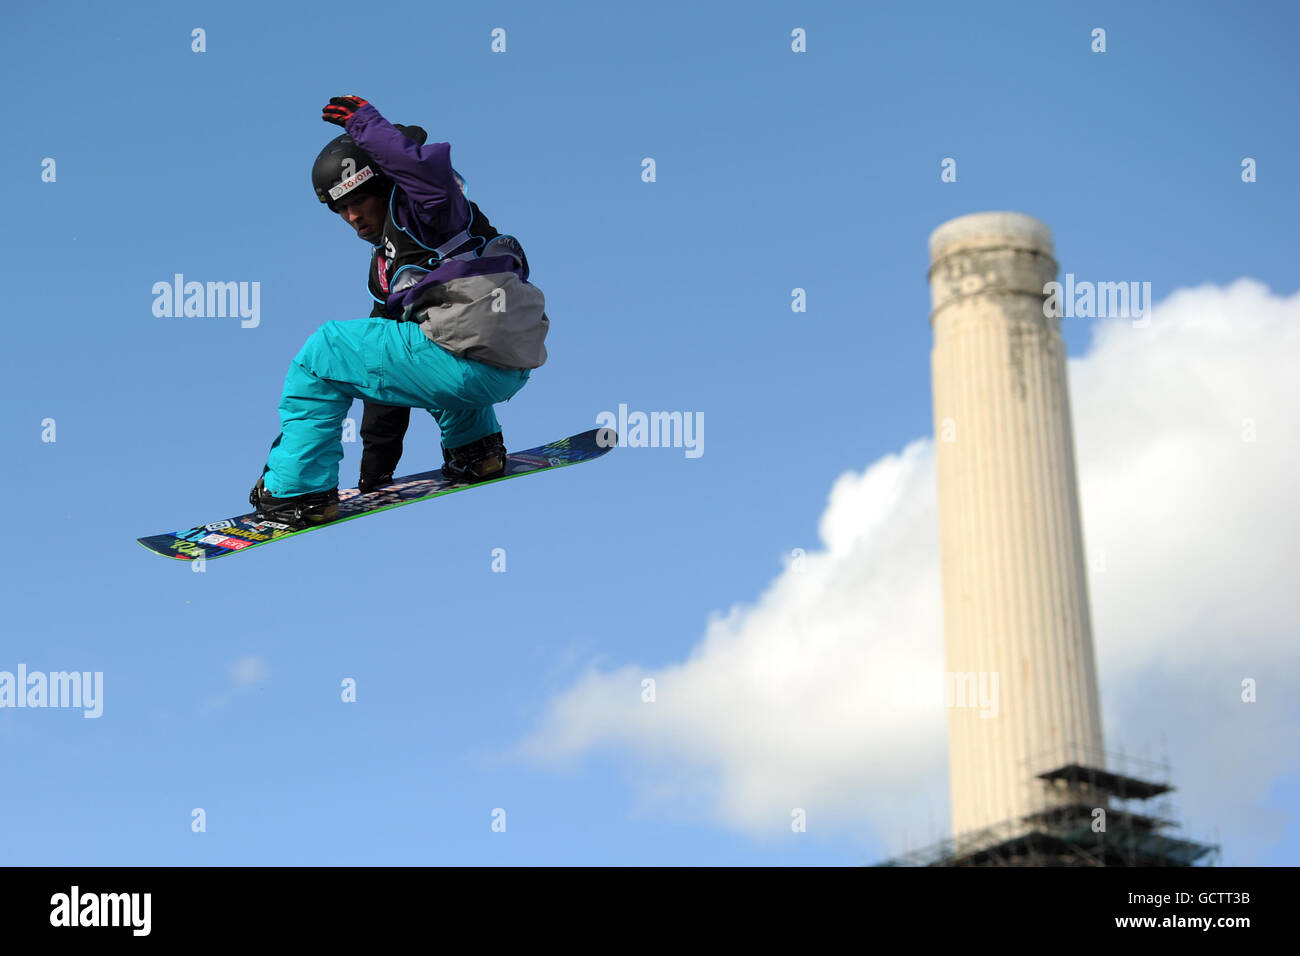 Ville Uotila of Finland during the LG Snowboard FIS World Cup in London Stock Photo